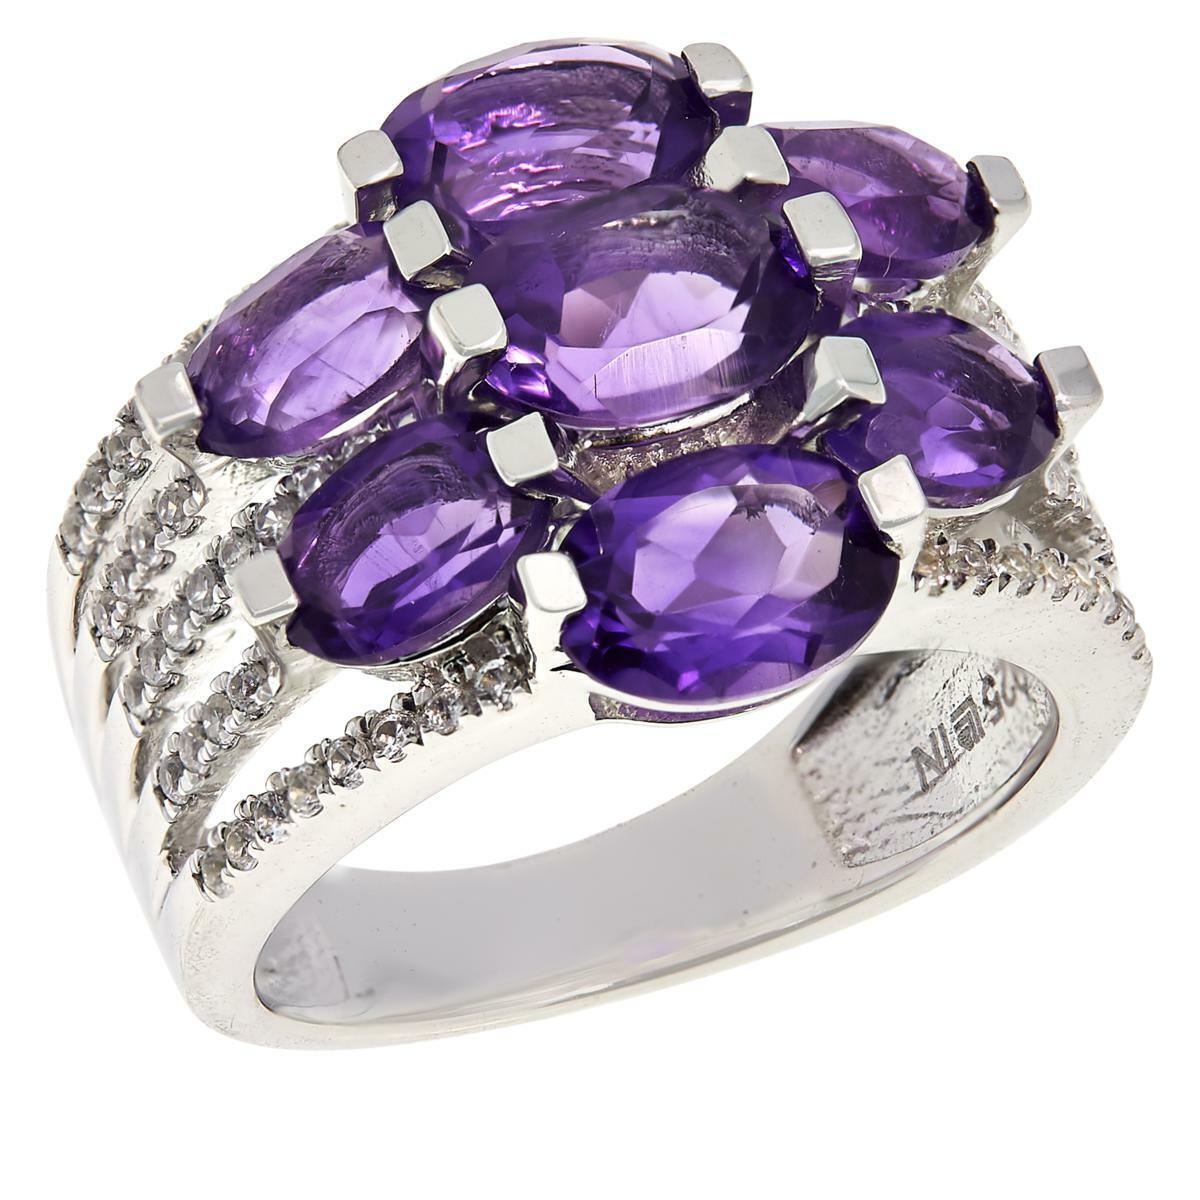 Colleen Lopez Oval Amethyst and White Zircon 7-Stone Ring, Size 9